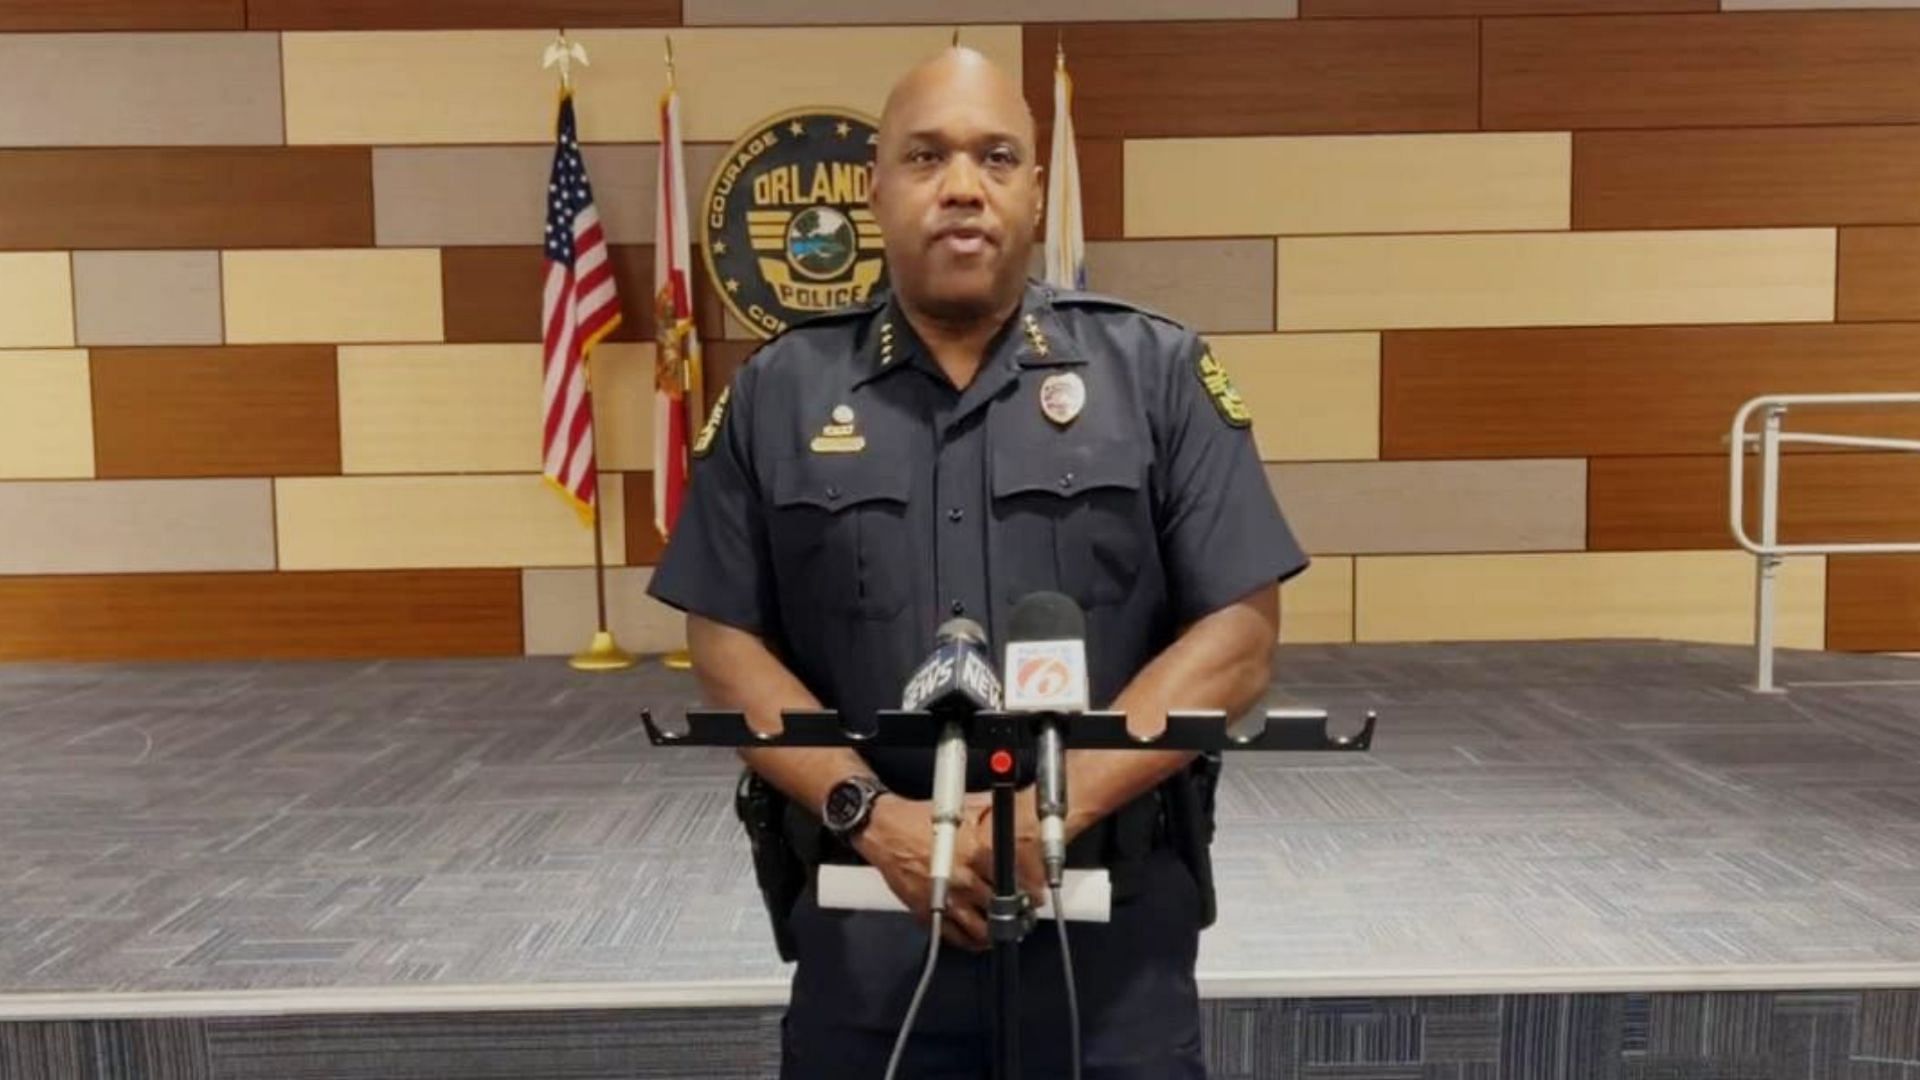 Police Chief Eric Smith confirmed in a press conference that seven people were injured in a mass shooting (Image via Twitter @/OrlandoPolice)